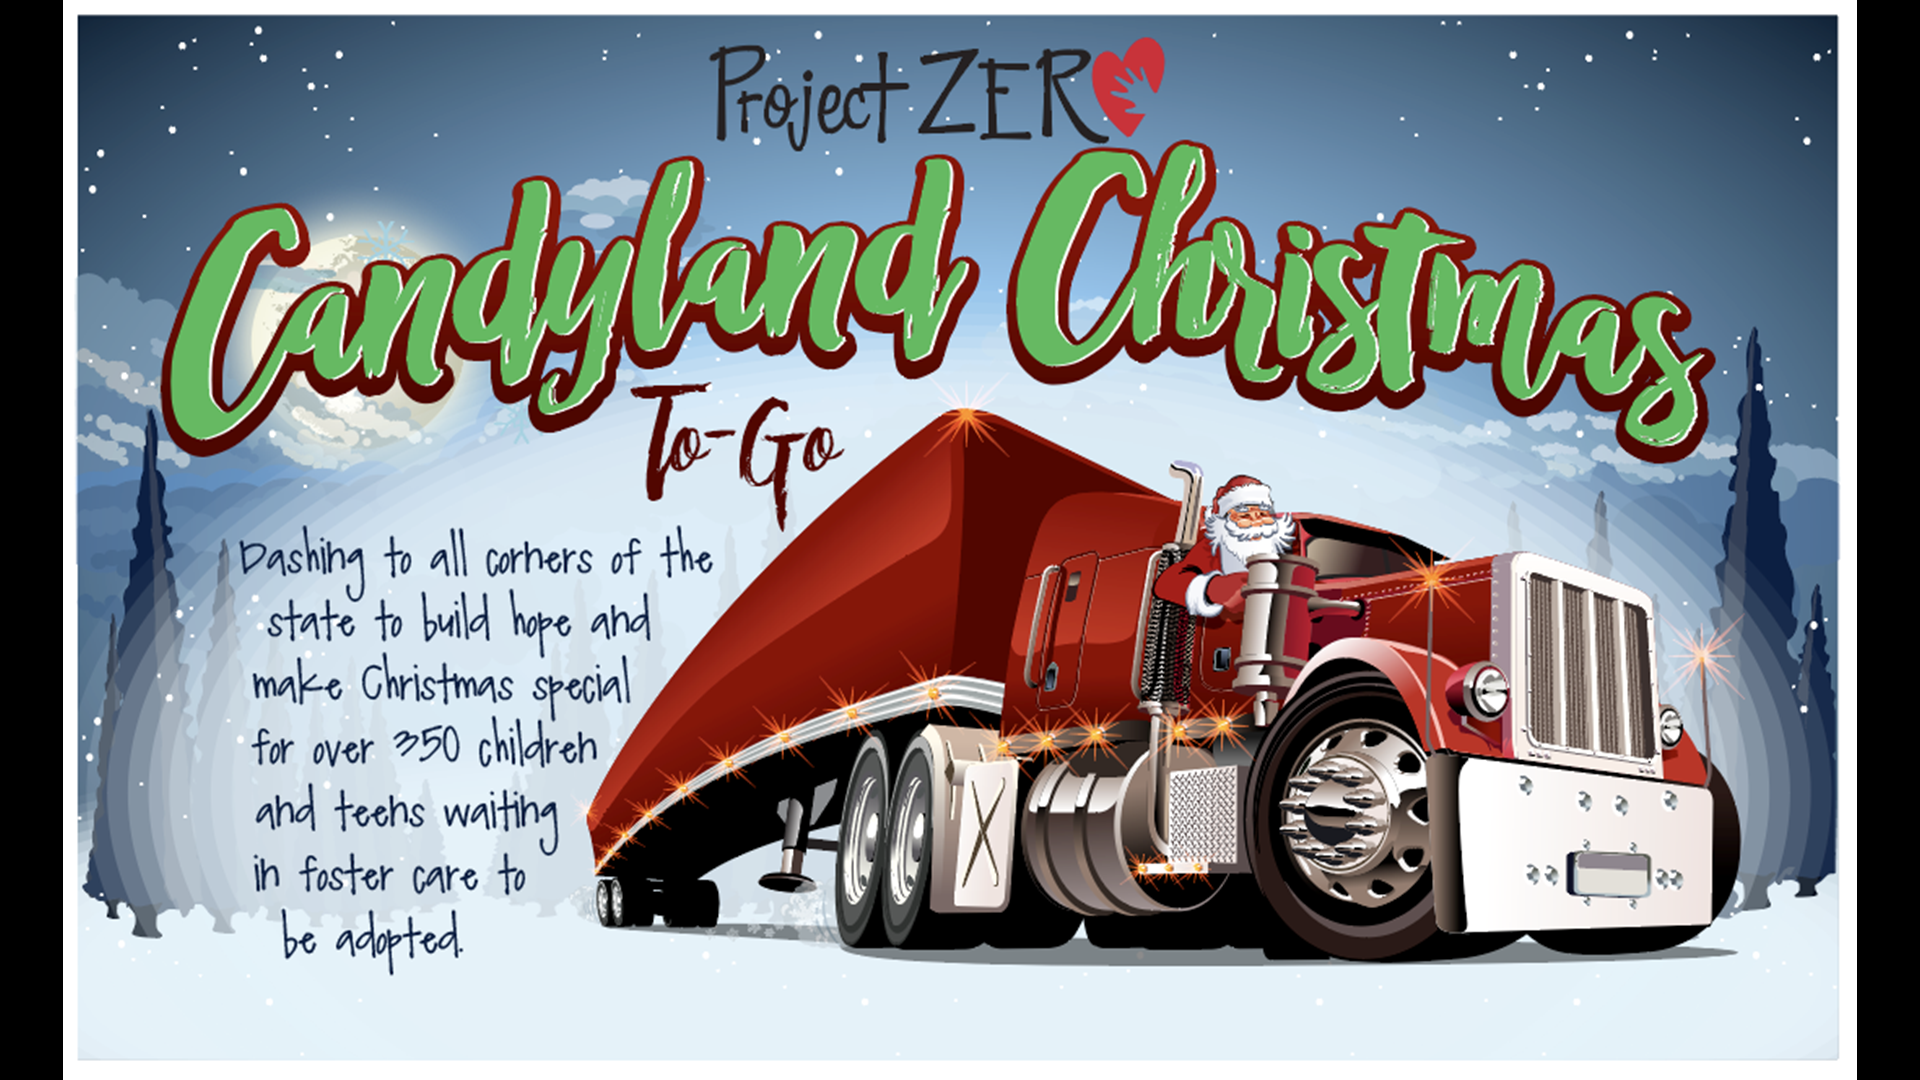 Project Zero and Arkansas DCFS are hosting Candyland Christmas To Go, an event that gives foster children Christmas gifts.